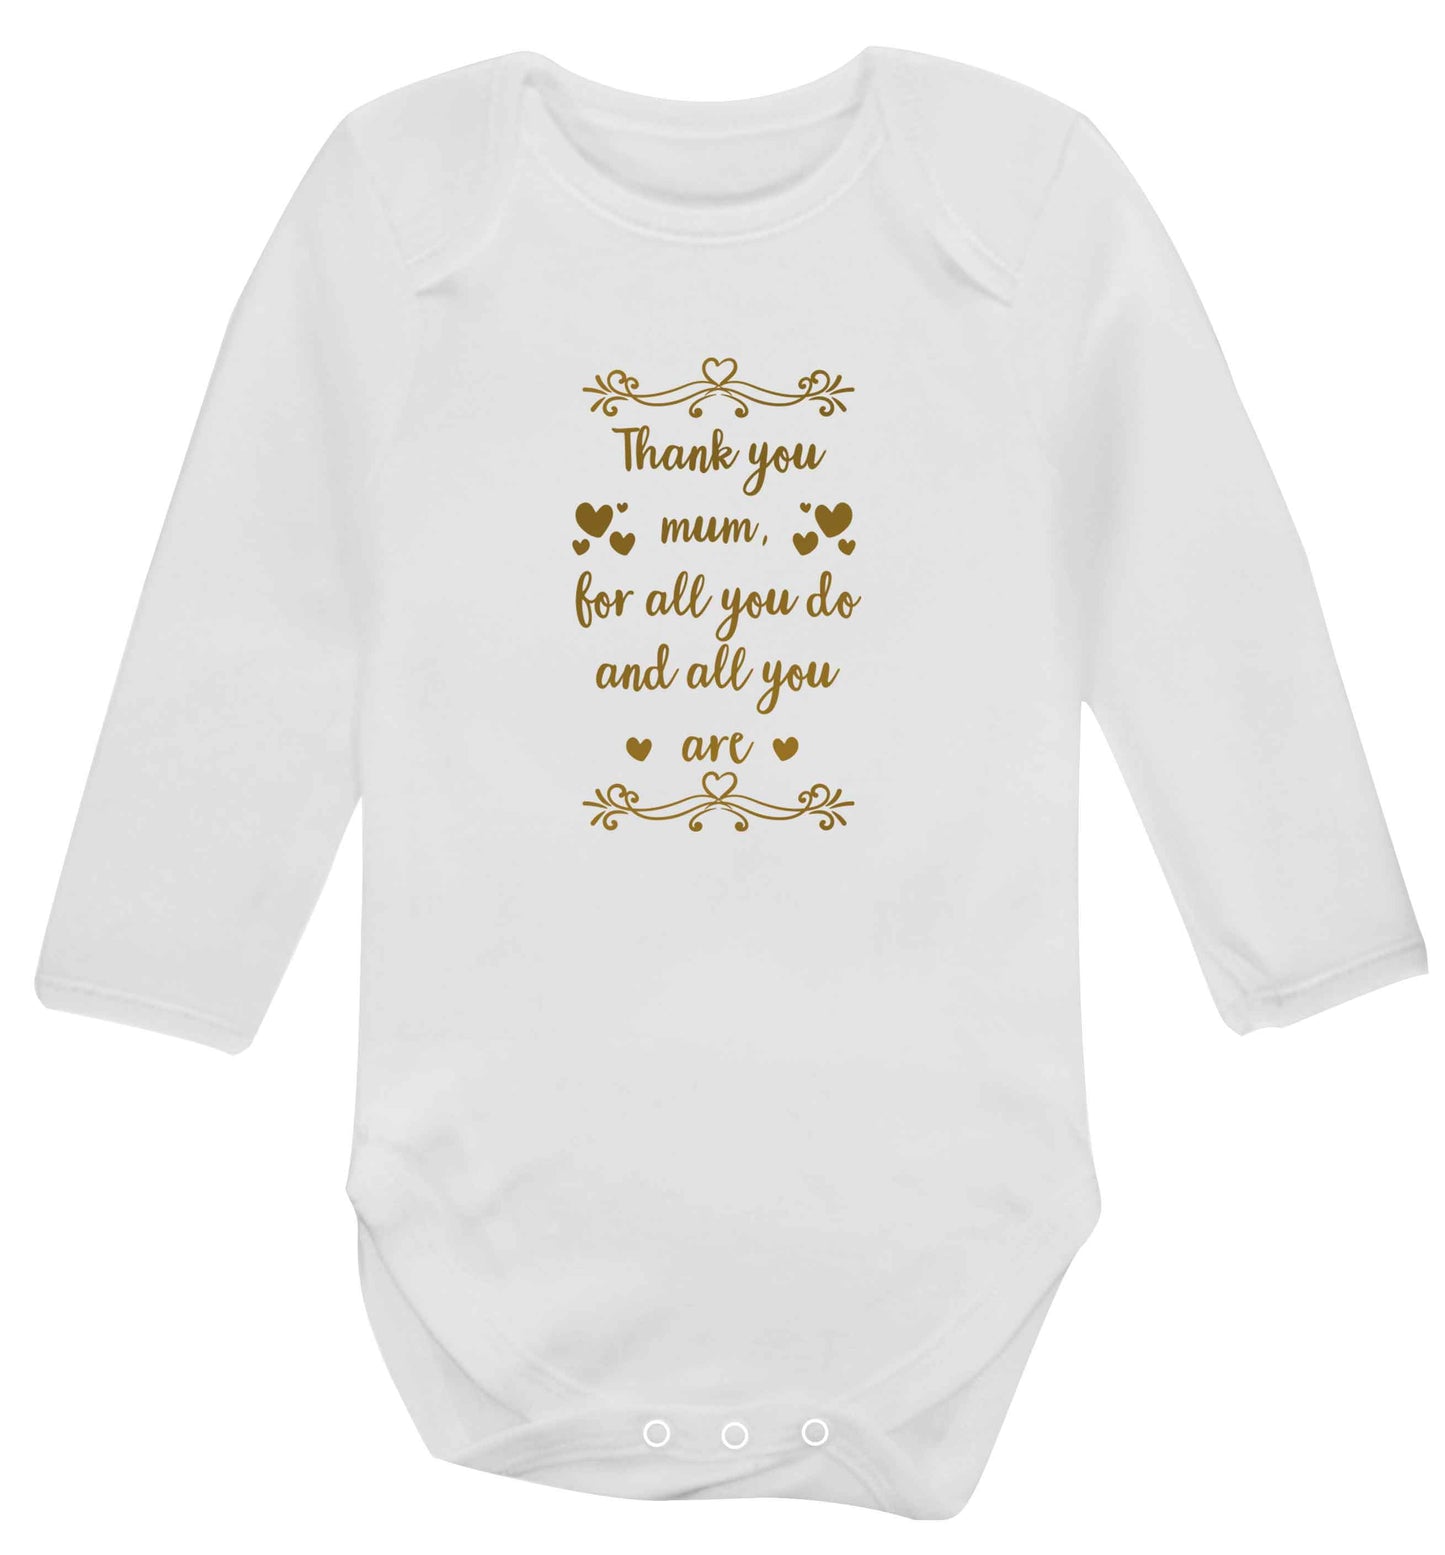 Gorgeous gifts for mums on mother's day! Thank you mum for all you do and all you are baby vest long sleeved white 6-12 months